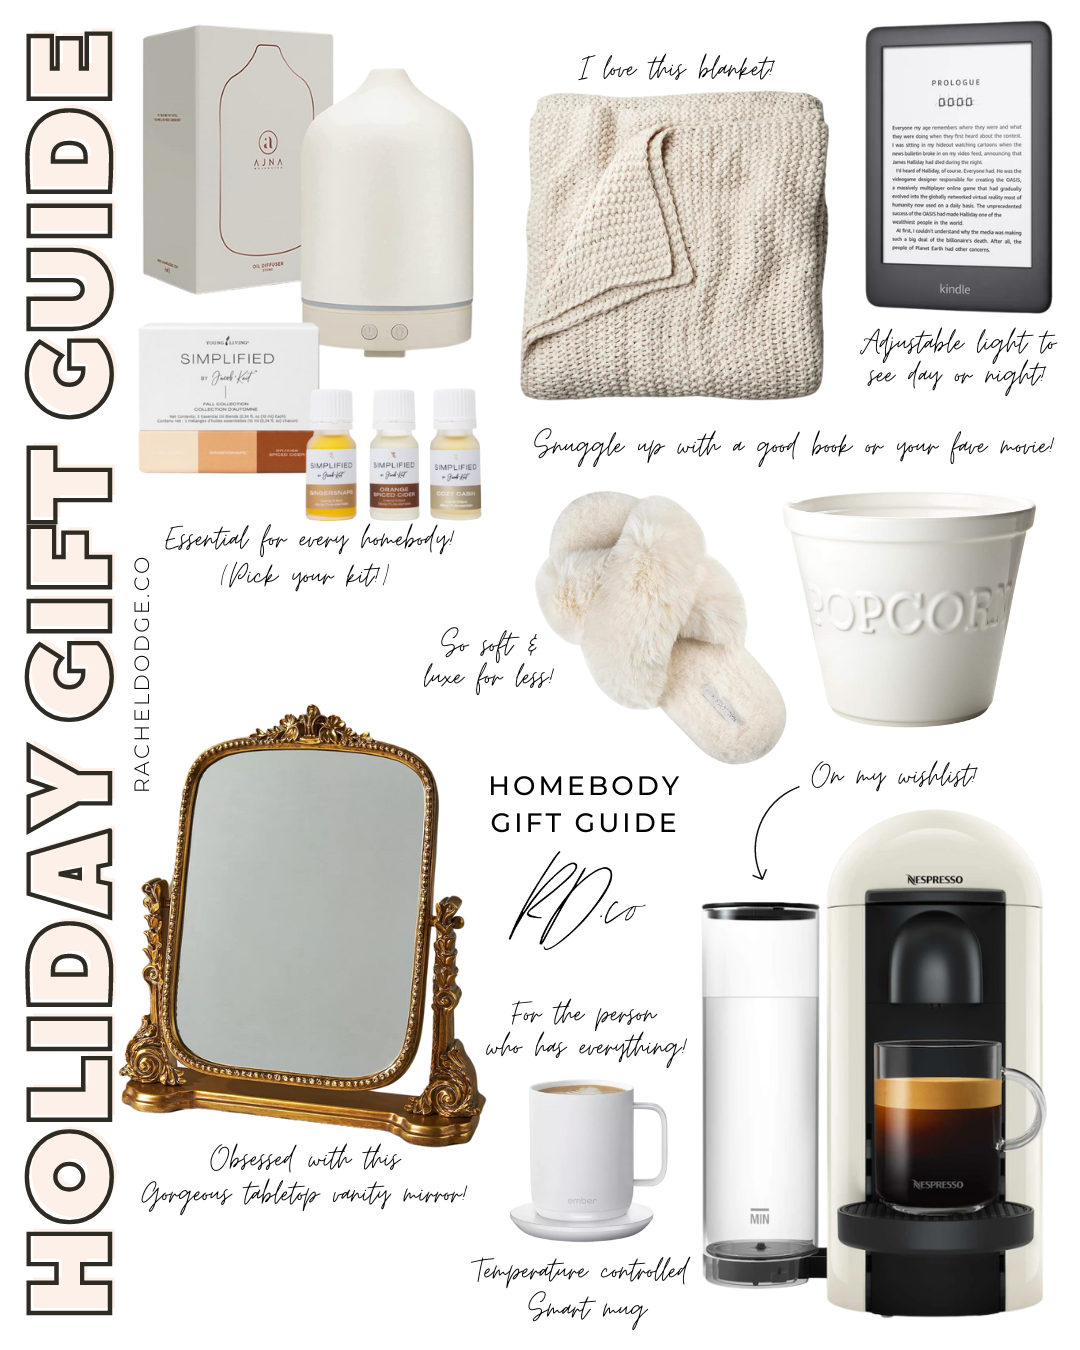 Gift Ideas for the homebody on your holiday list
